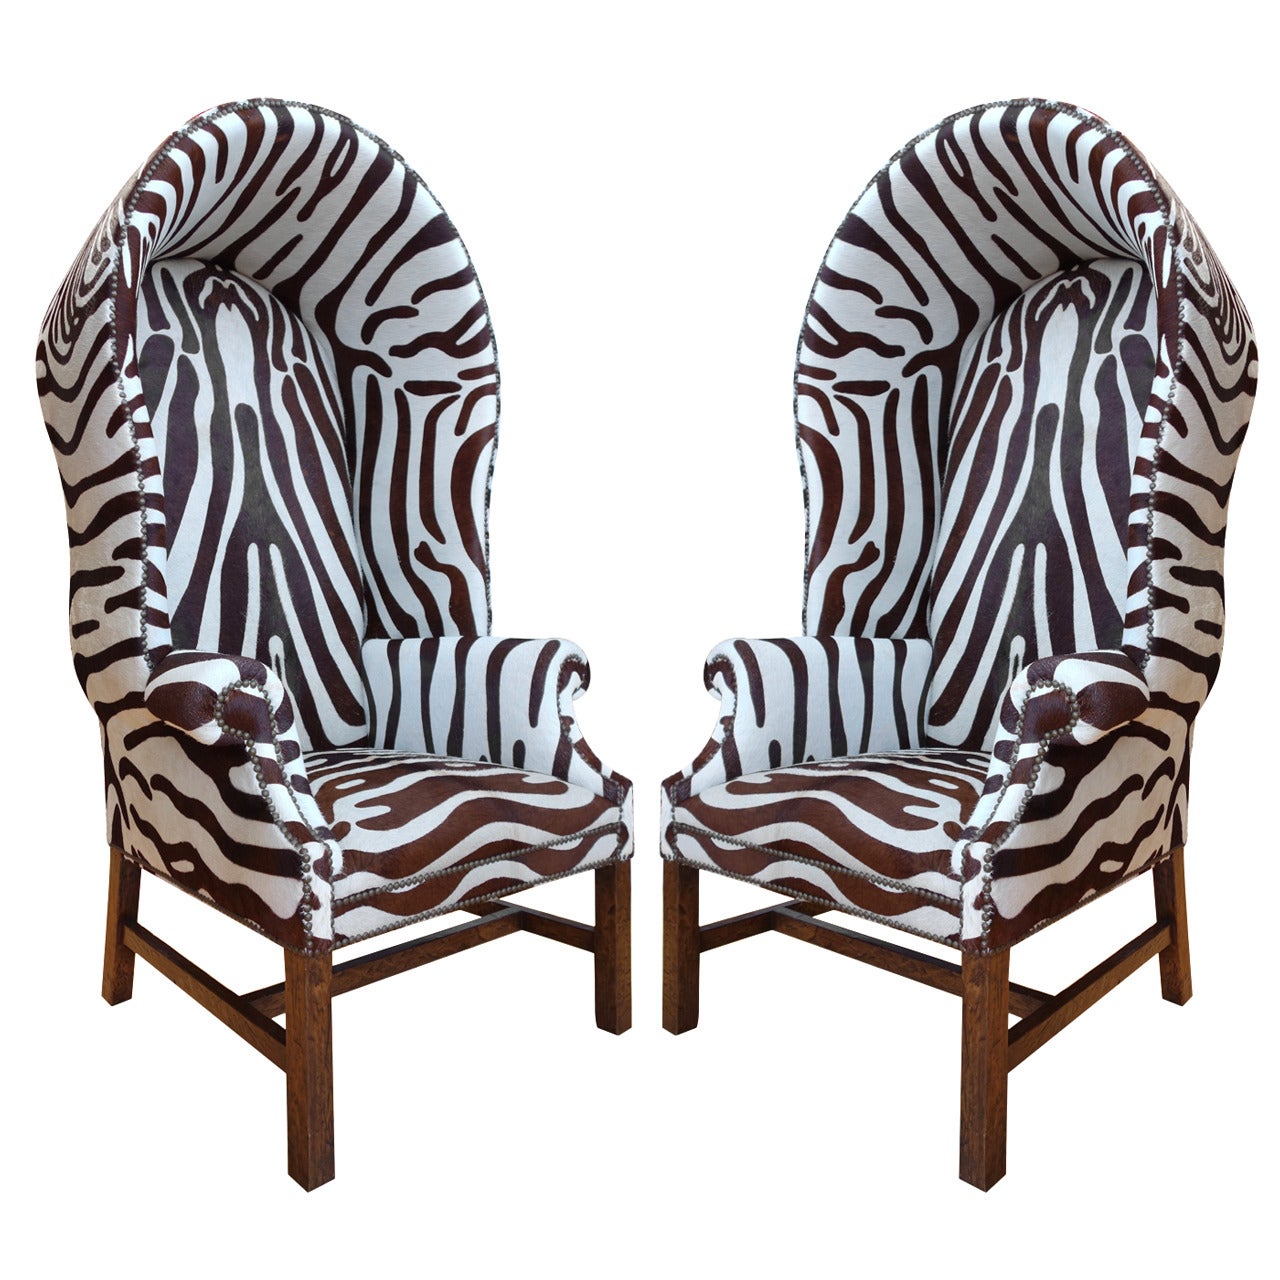 Fantastic Pair of Butler's Chairs